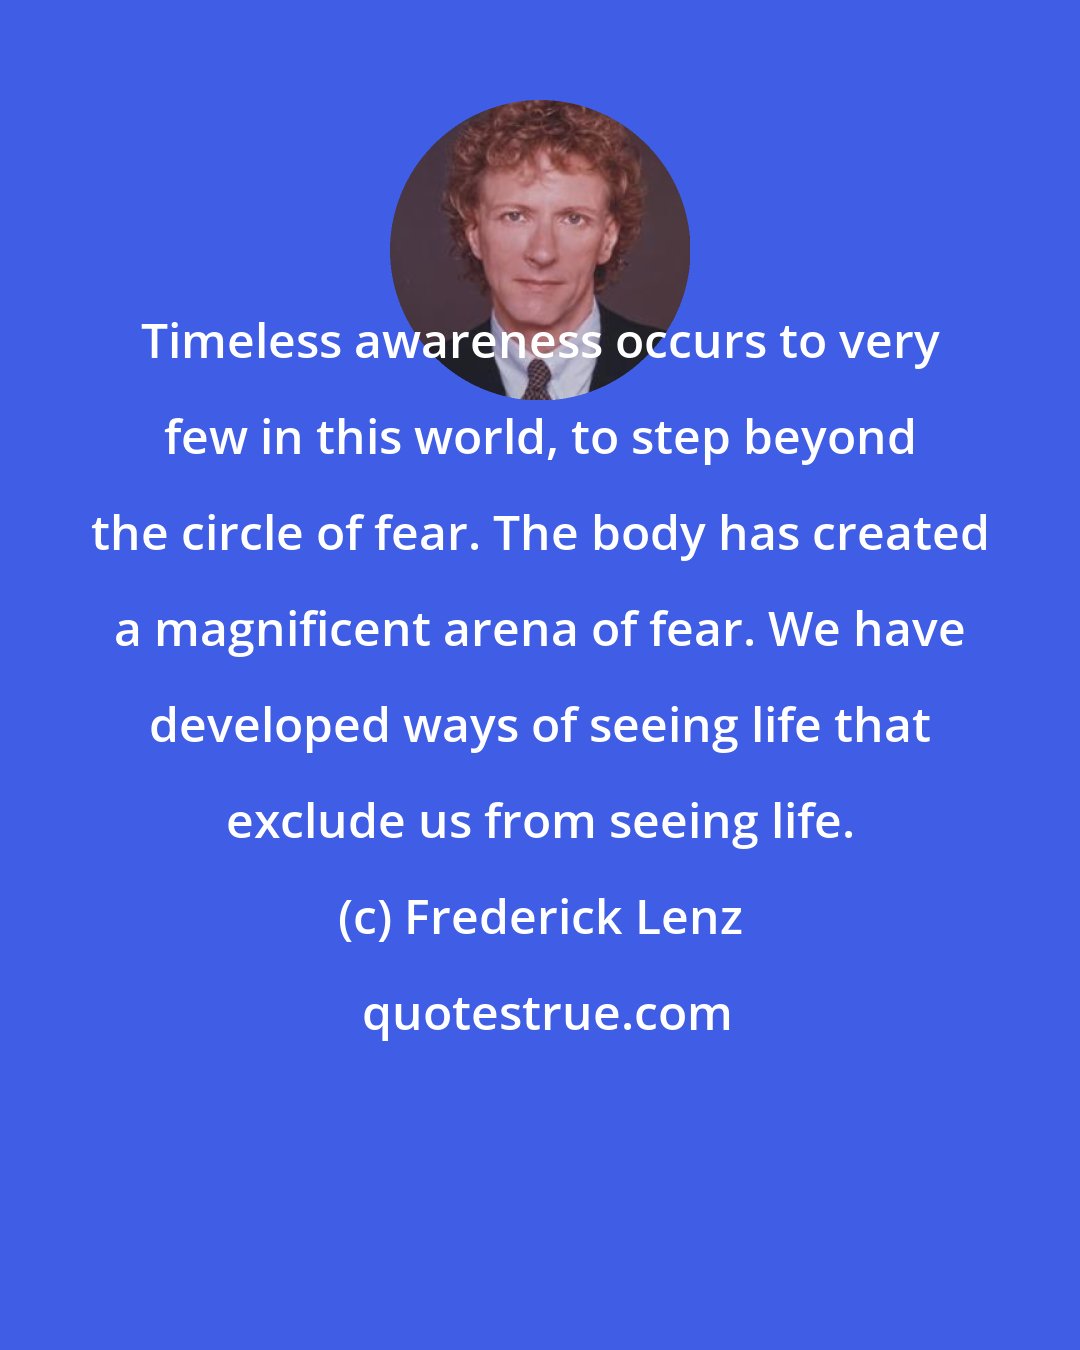 Frederick Lenz: Timeless awareness occurs to very few in this world, to step beyond the circle of fear. The body has created a magnificent arena of fear. We have developed ways of seeing life that exclude us from seeing life.